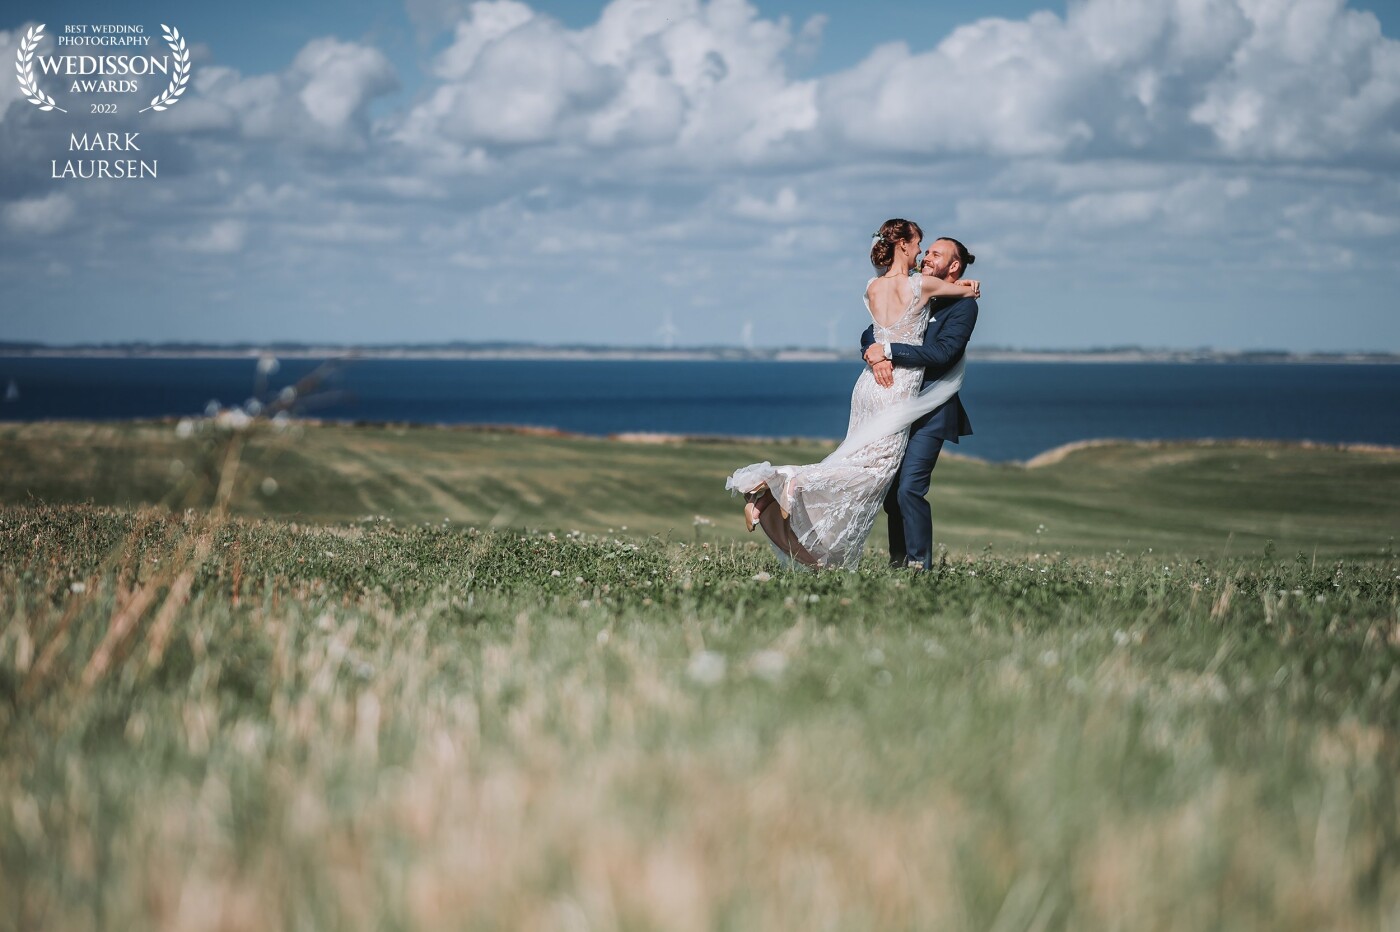 A warm but very windy late summer wedding. The whole weddingday was a complete bliss to be part of, with the beautiful scenery and a lot of love and happiness floating in the air.